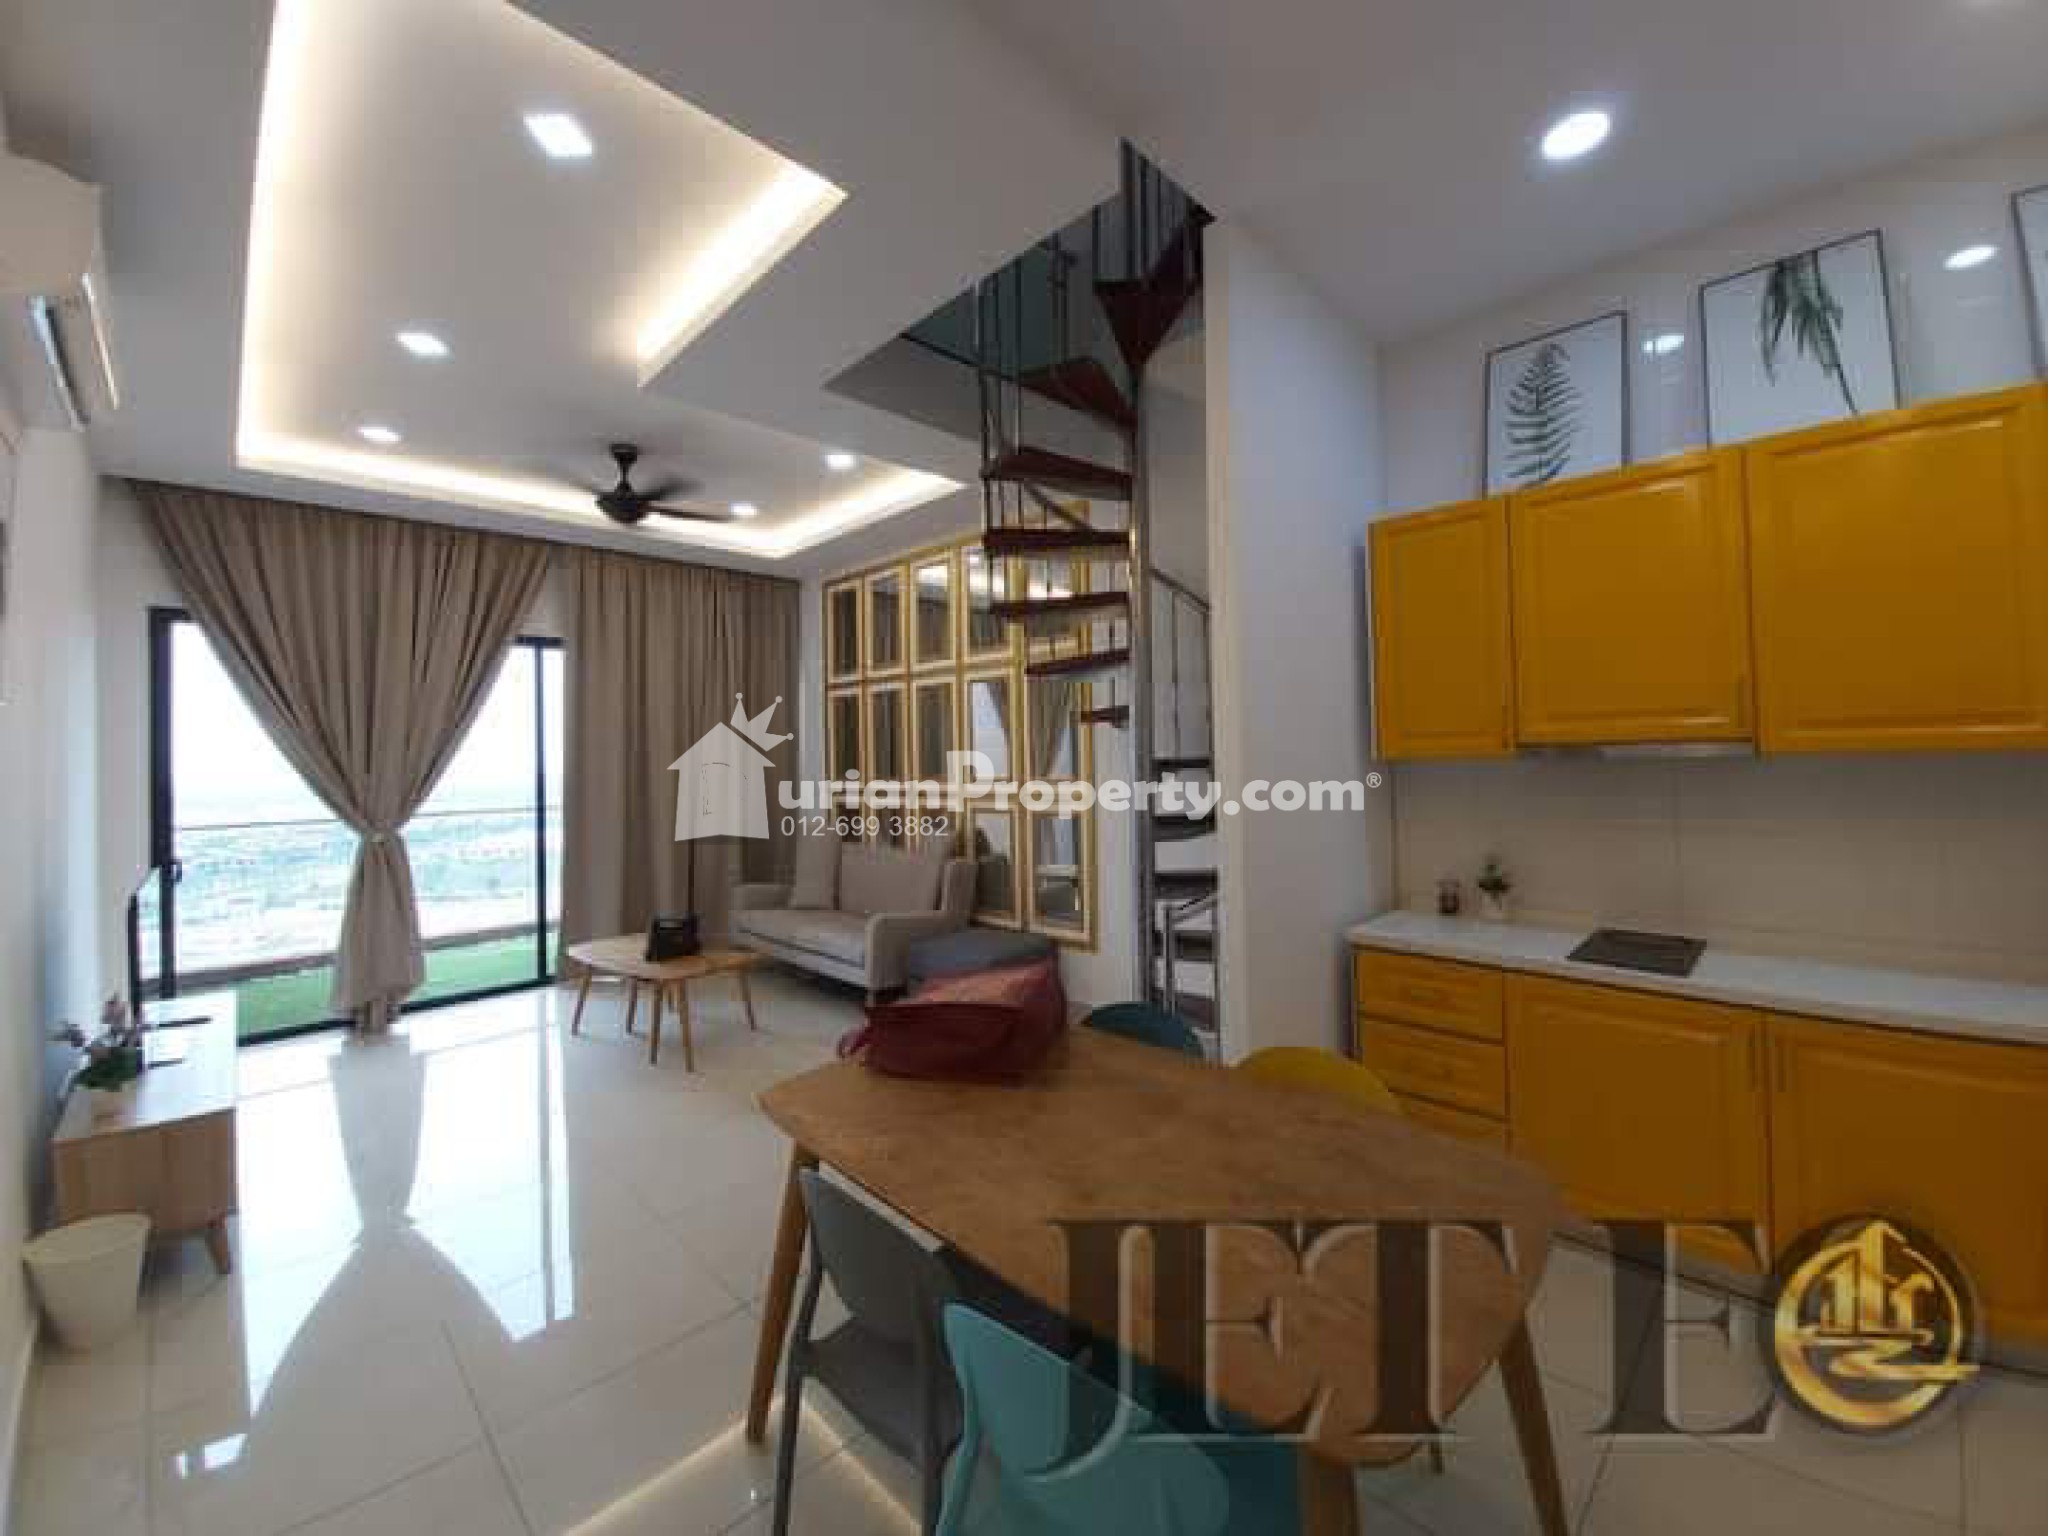 Apartment For Rent at The Parque Residences